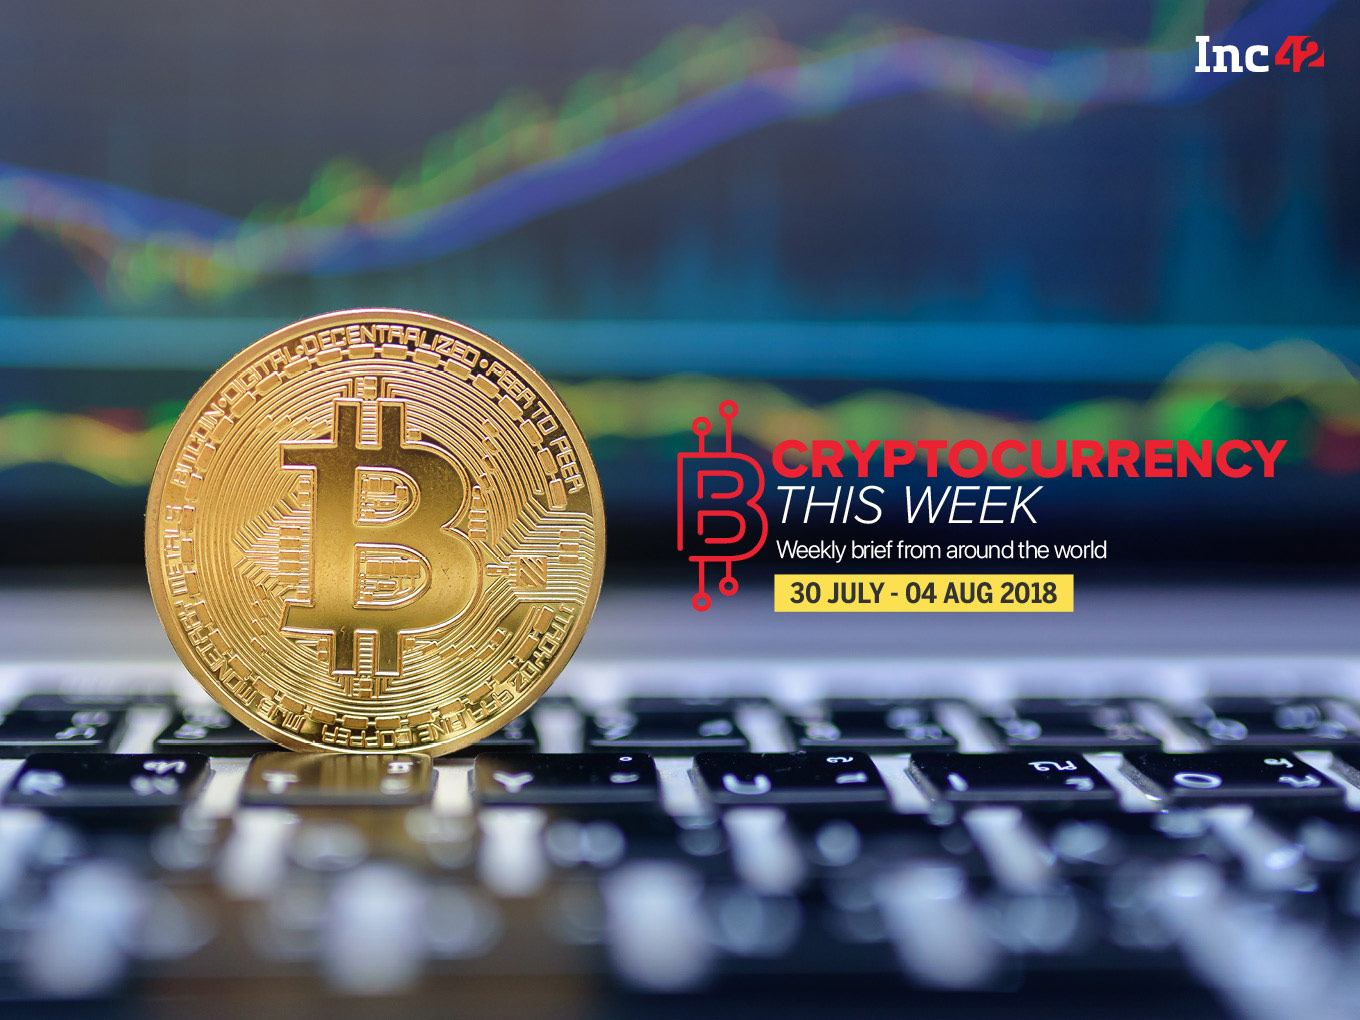 cryptocurrency-this-week-indias-interdisciplinary-committee-is-yet-to-finalise-its-cryptocurrency-report-and-more-feature